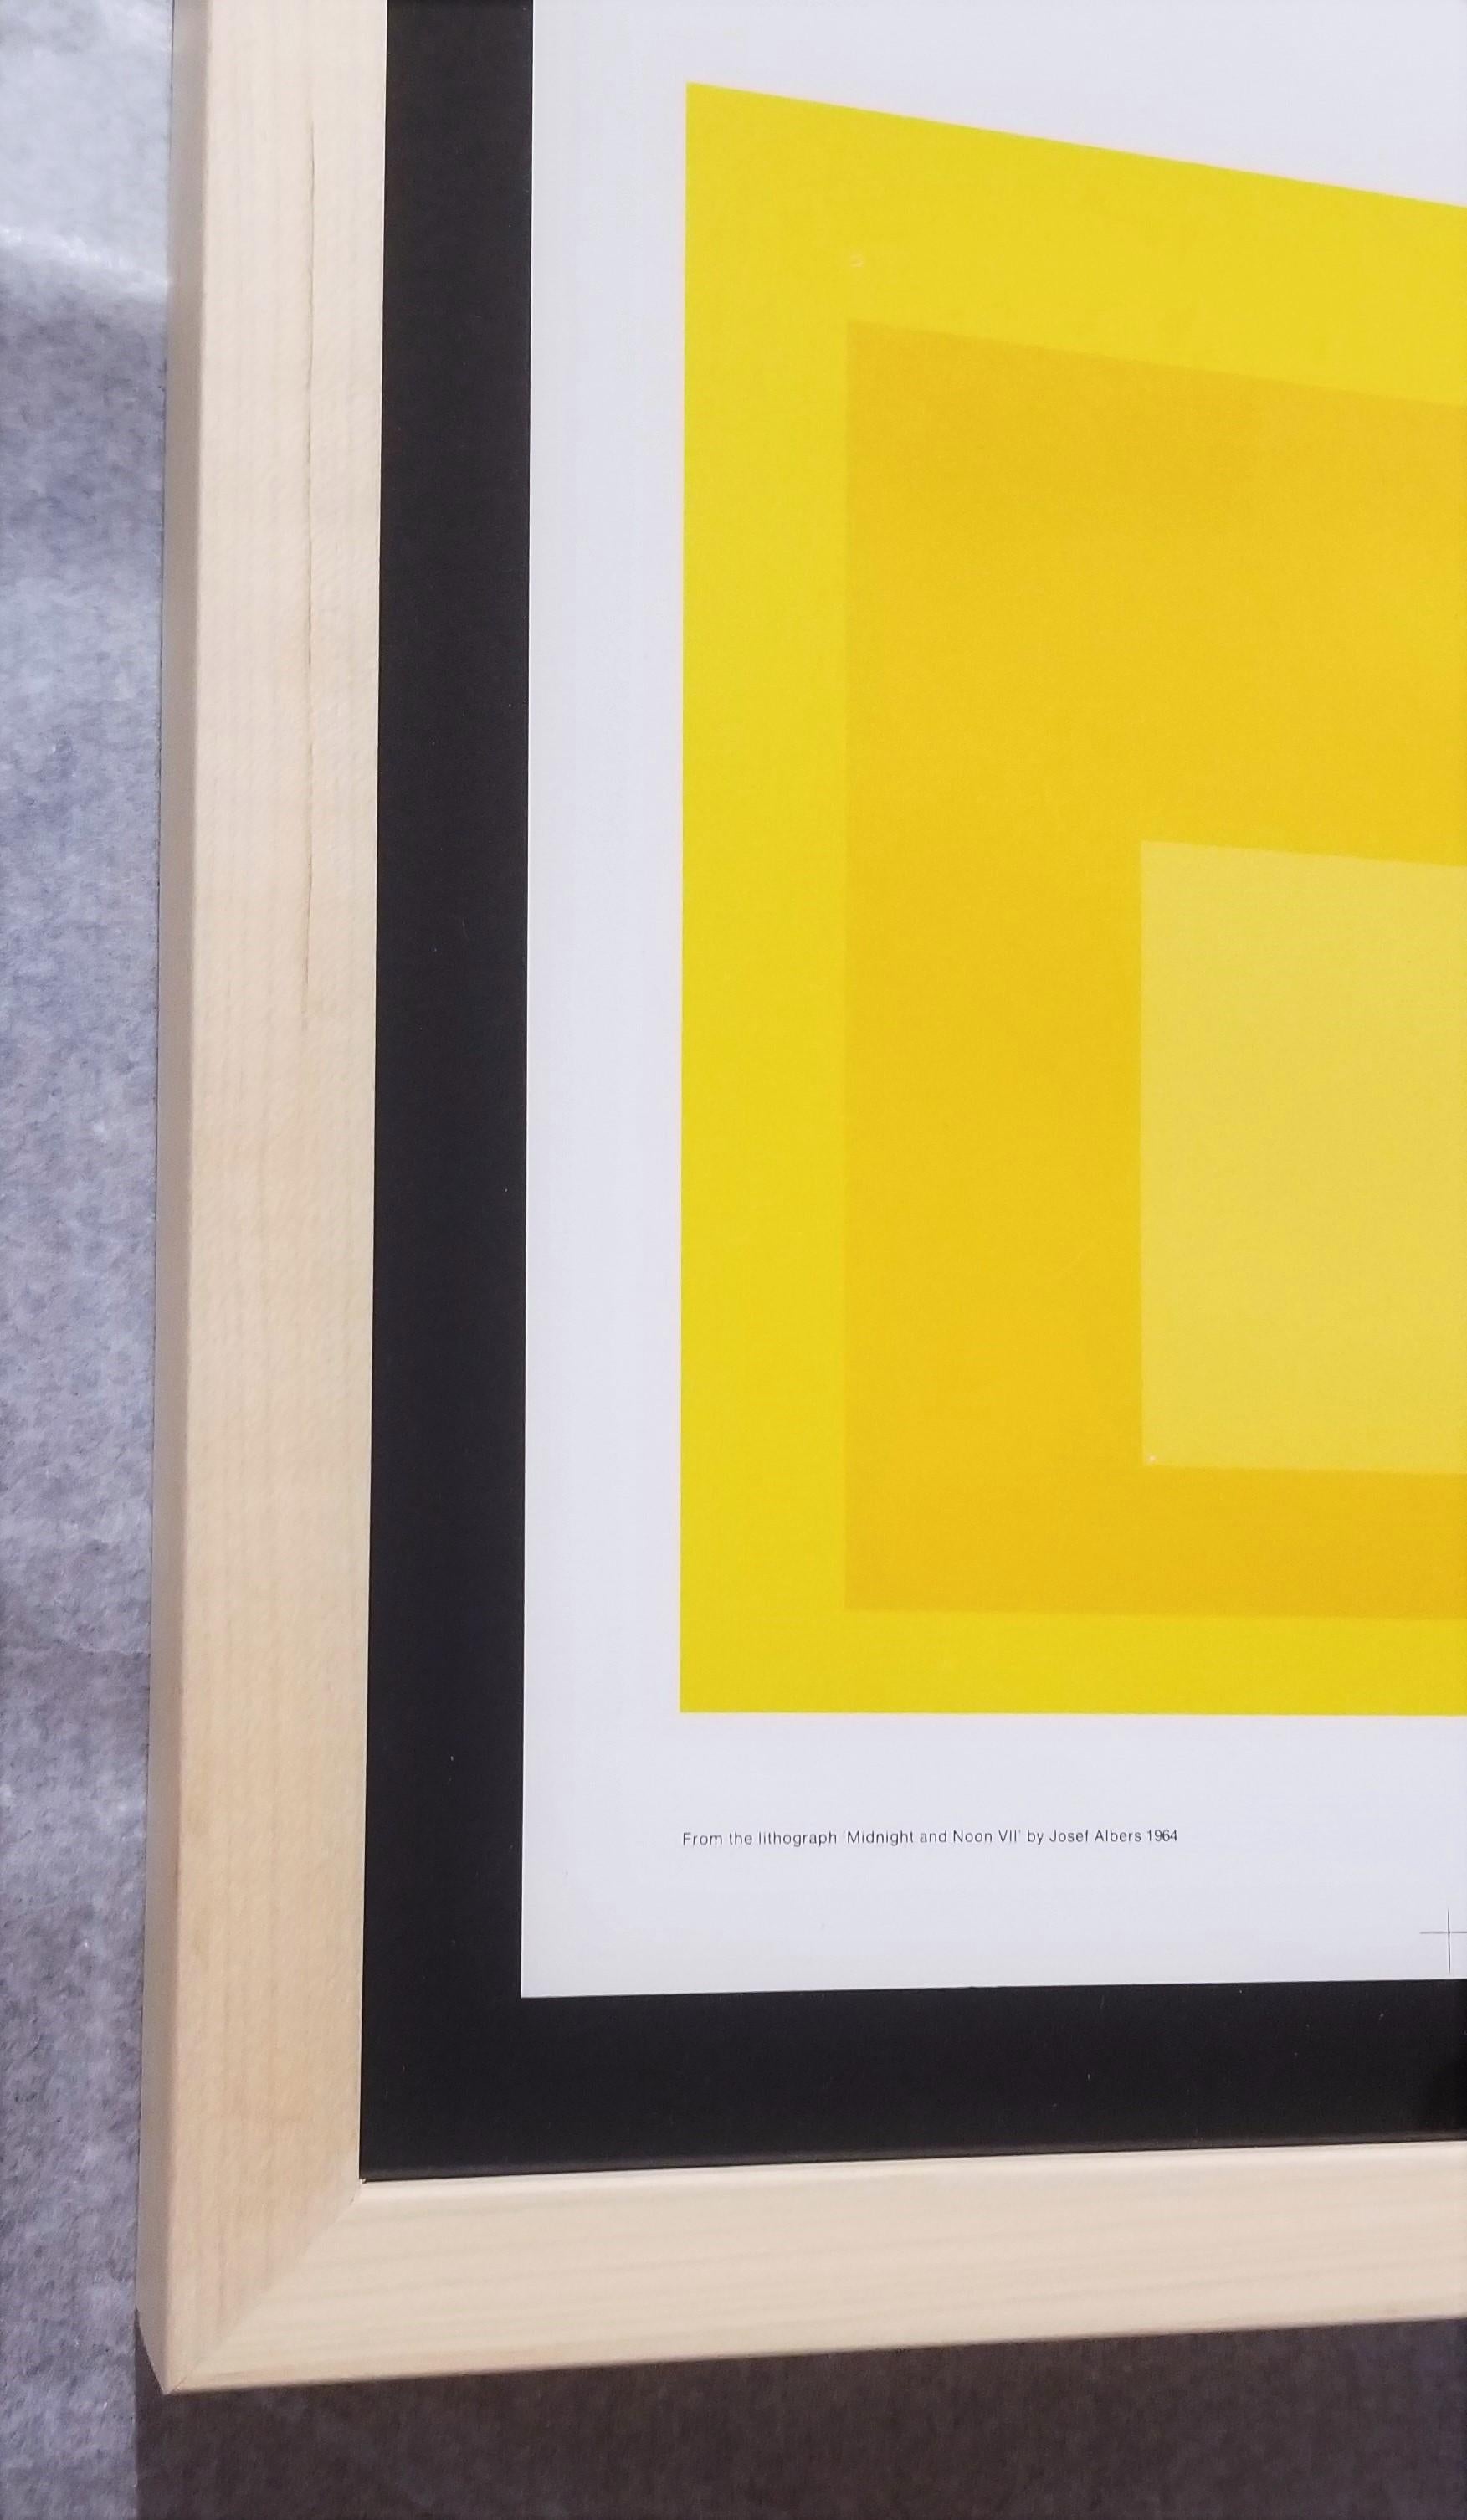 Josef Albers : 25 Years of Graphic Work (Midnight and Noon VII) Poster /// Square en vente 3